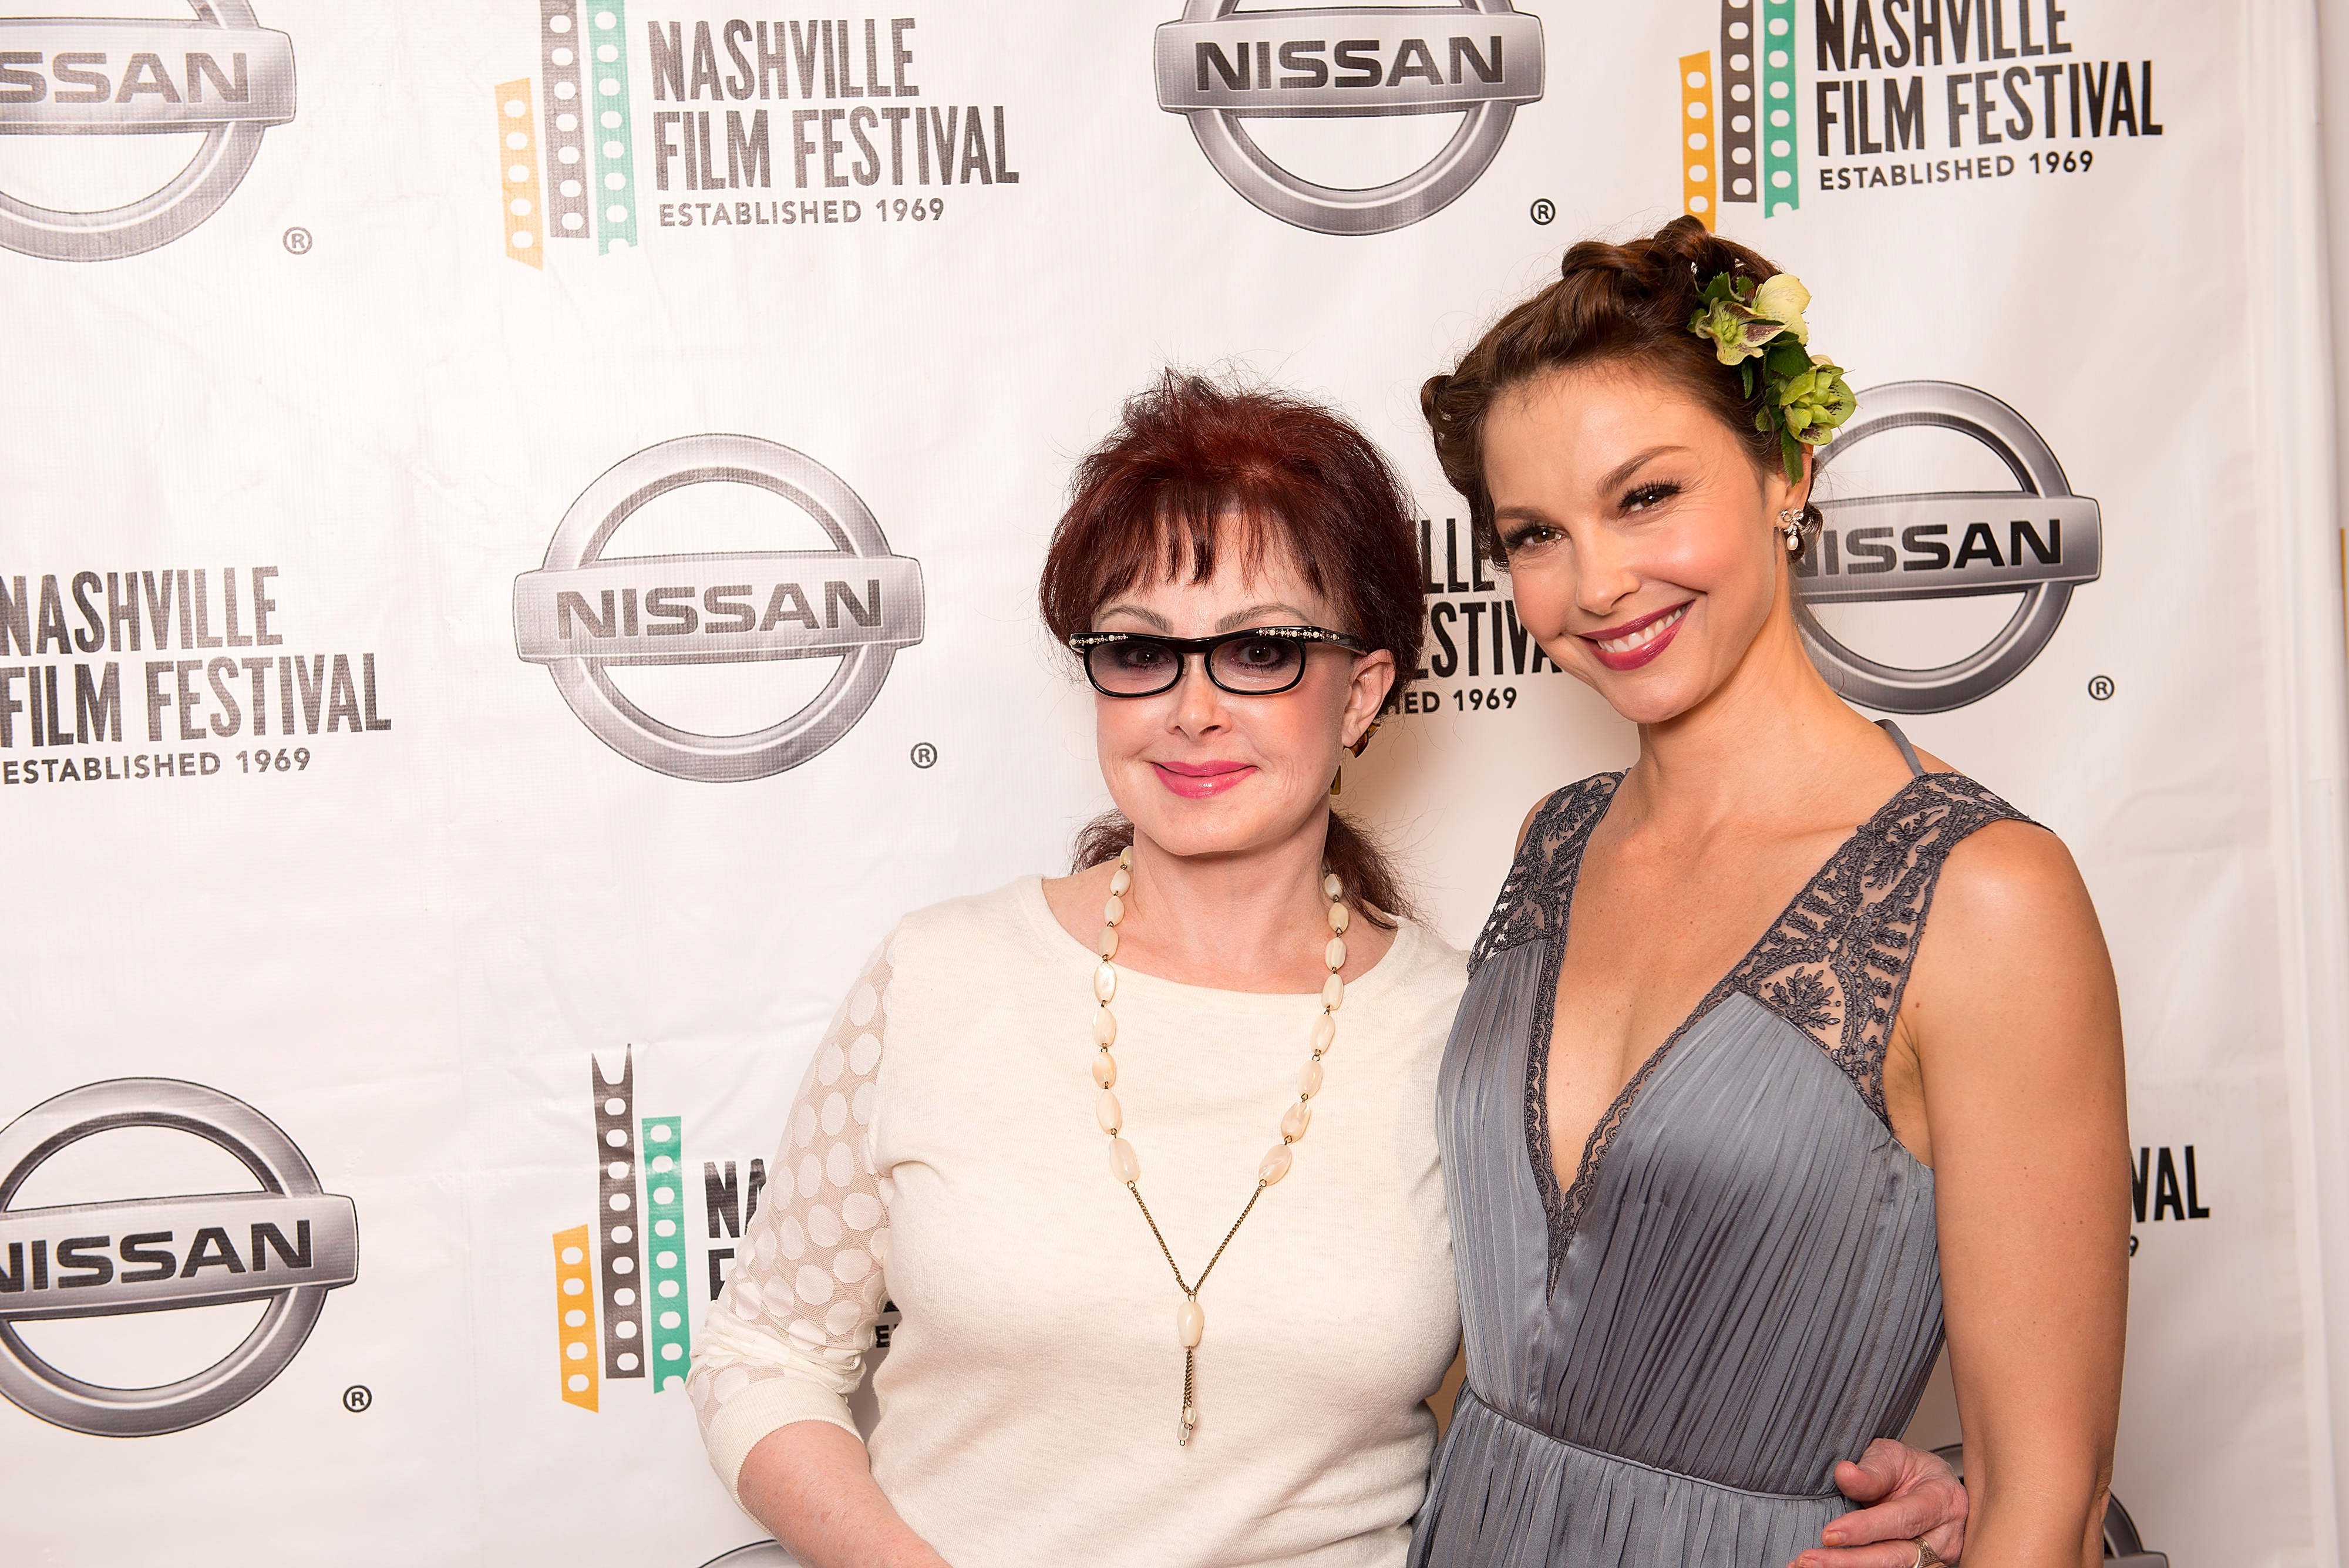 Naomi and Ashley Judd at the Nashville Film Festival in Nashville, Tennessee on April 26, 2014 | Source: Getty Images